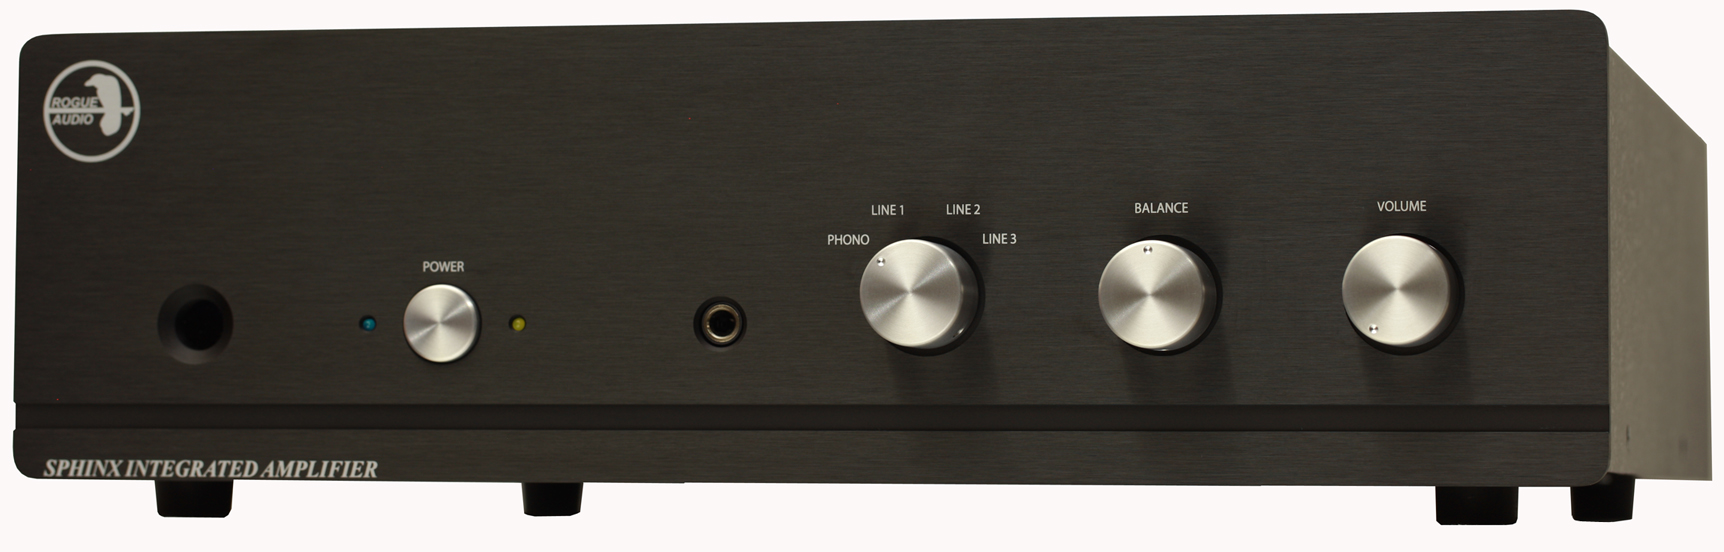 Rogue Audio Sphinx v3 Tube Hybrid Integrated Amplifier